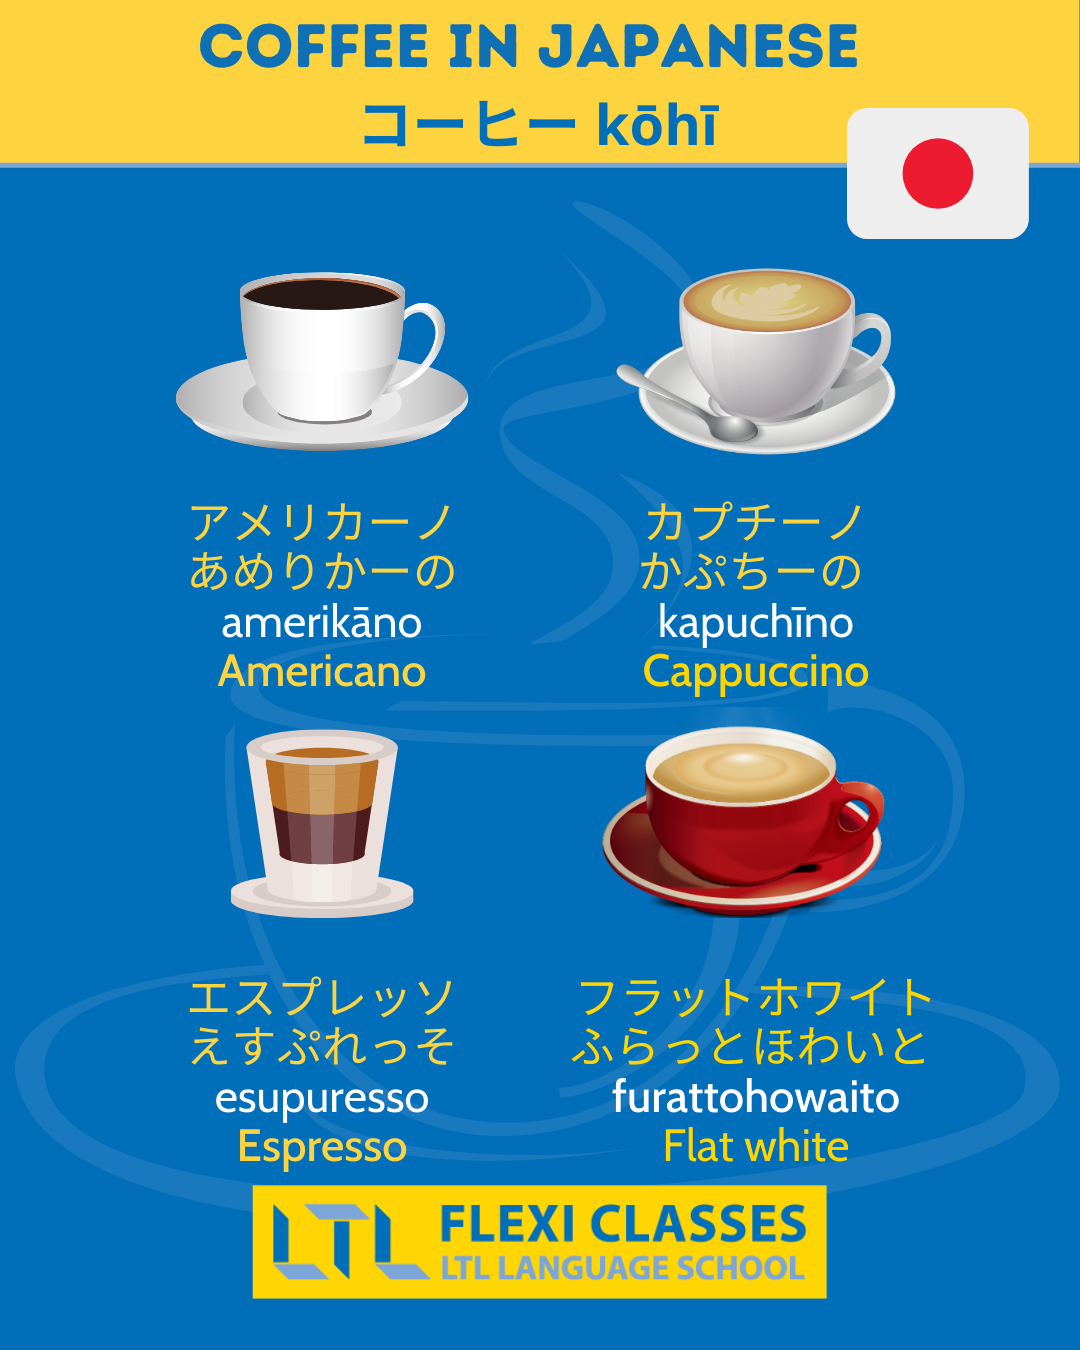 Coffee in Japanese